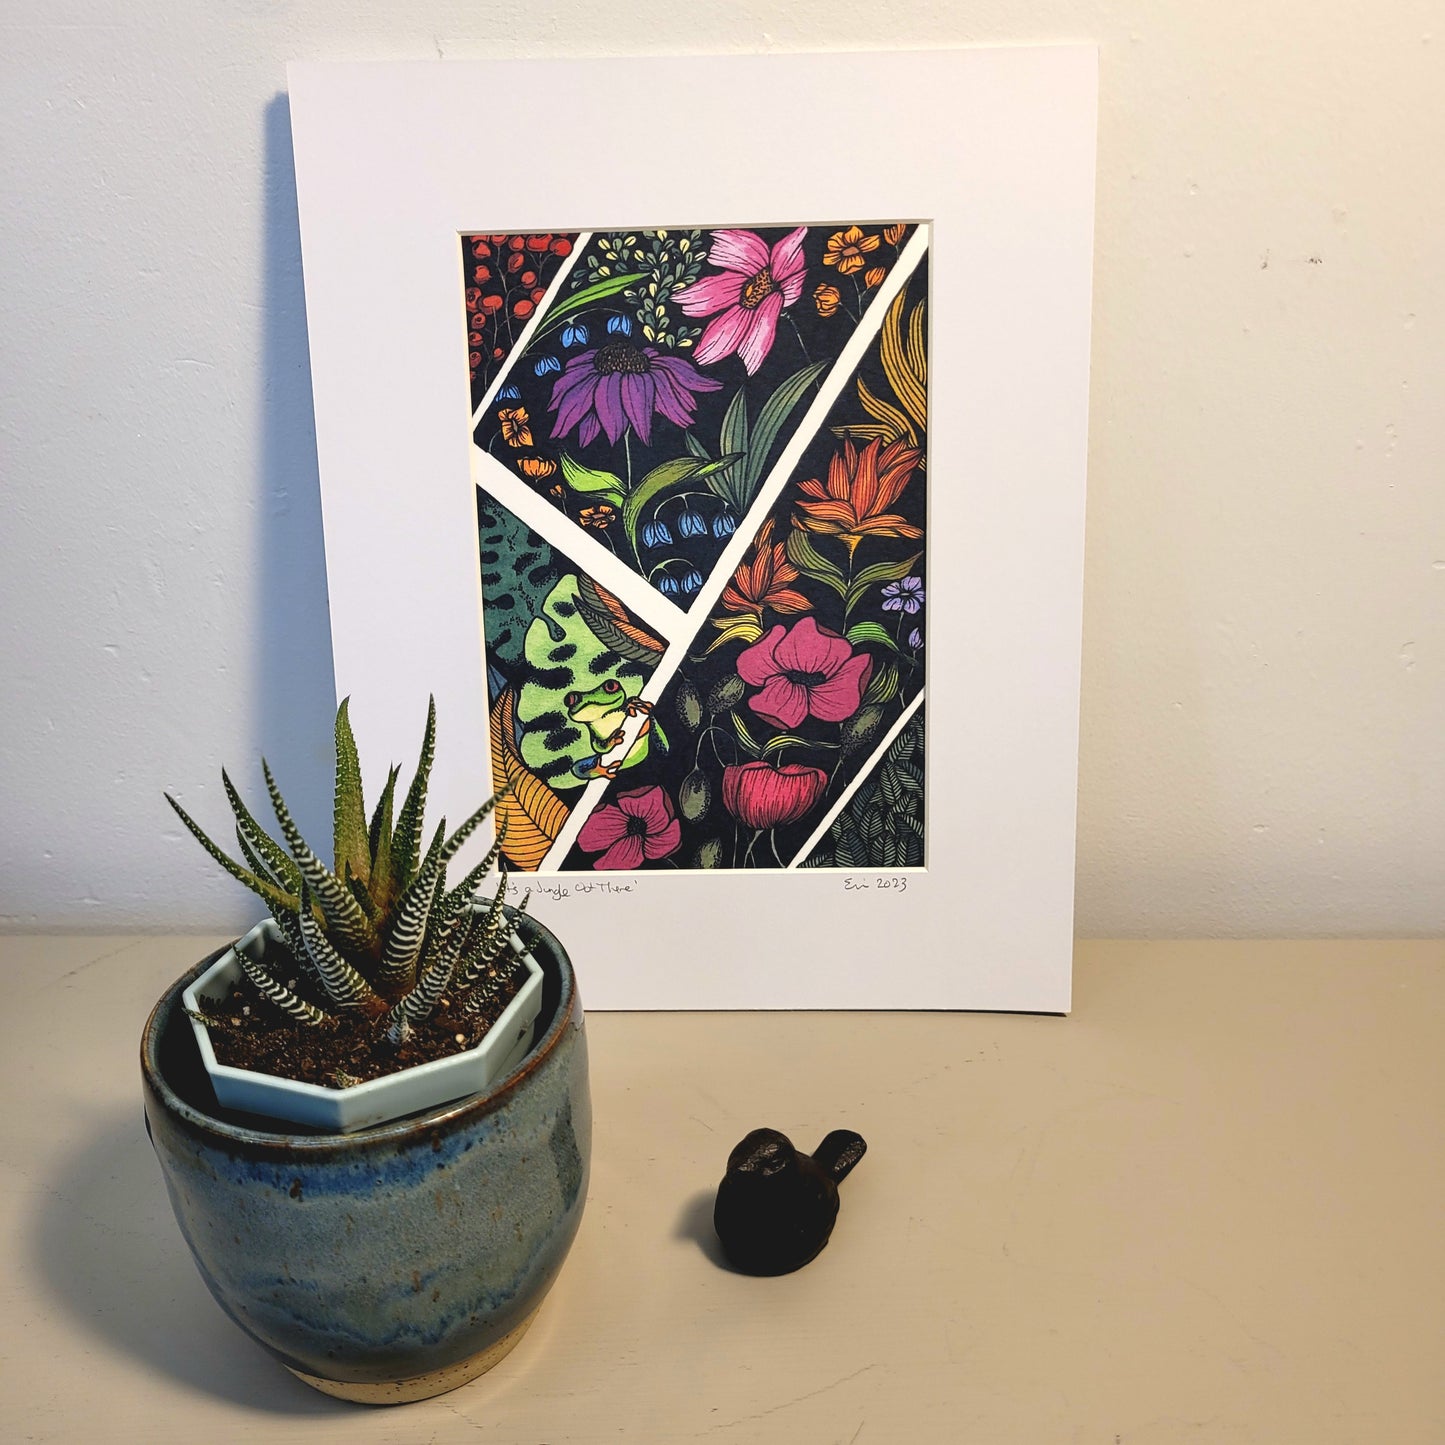 Signed & Matted Print - It's a Jungle Out There